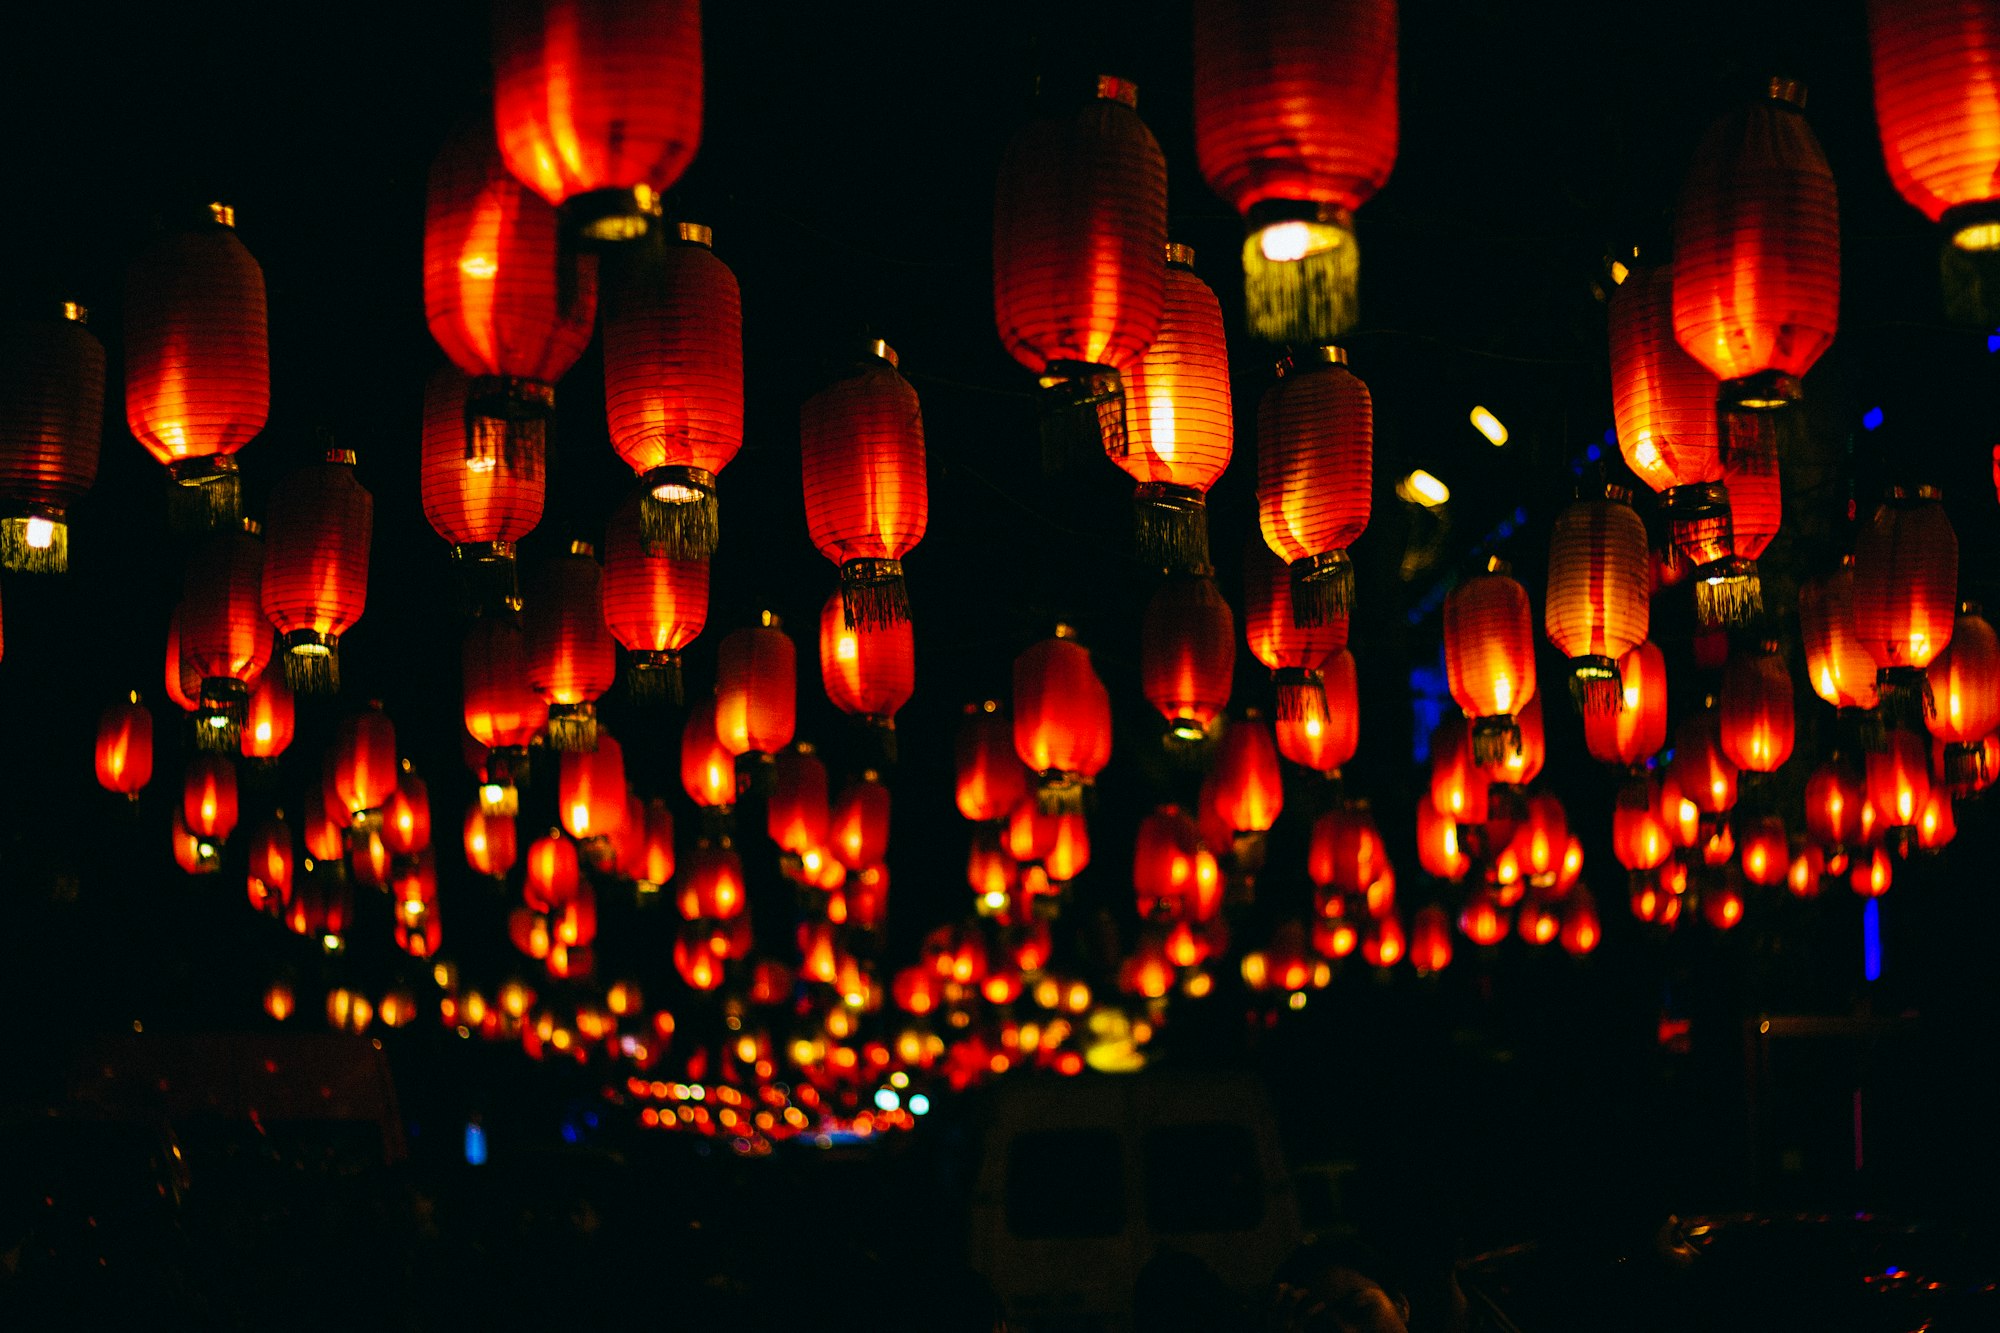 Taken in Beijing China, these paper lanterns hung over us as we walked down a street late at night through the dining district.